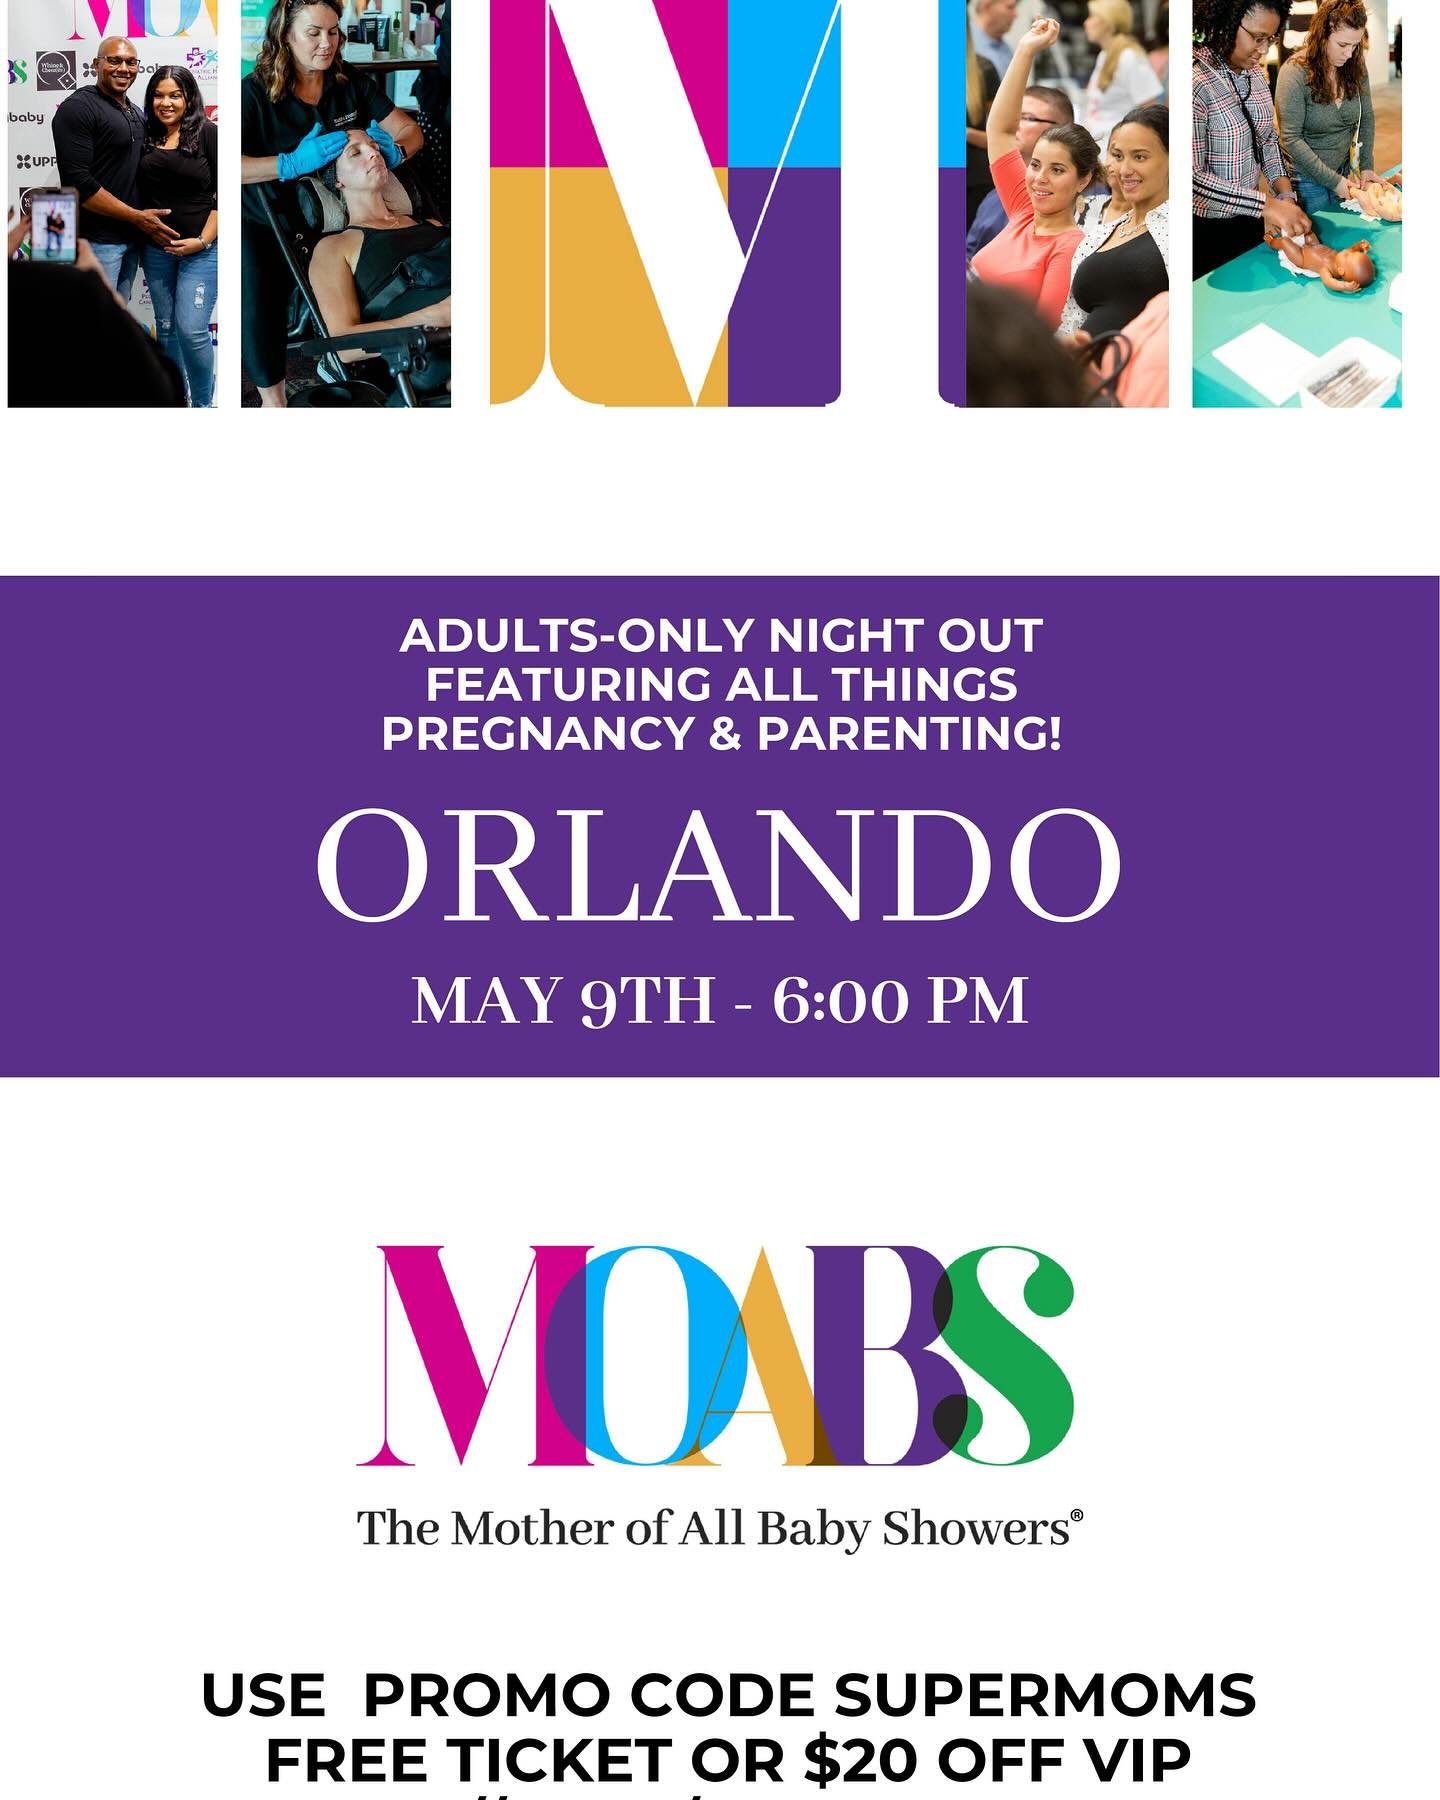 Calling all parents and soon-to-be parents! Get ready for the ultimate adults-only night out at Orlando Science Center on Thursday, May 9th, starting at 6pm with The Mother of All Baby Showers!  Register with link in bio. 
 
Join us for an unforgetta